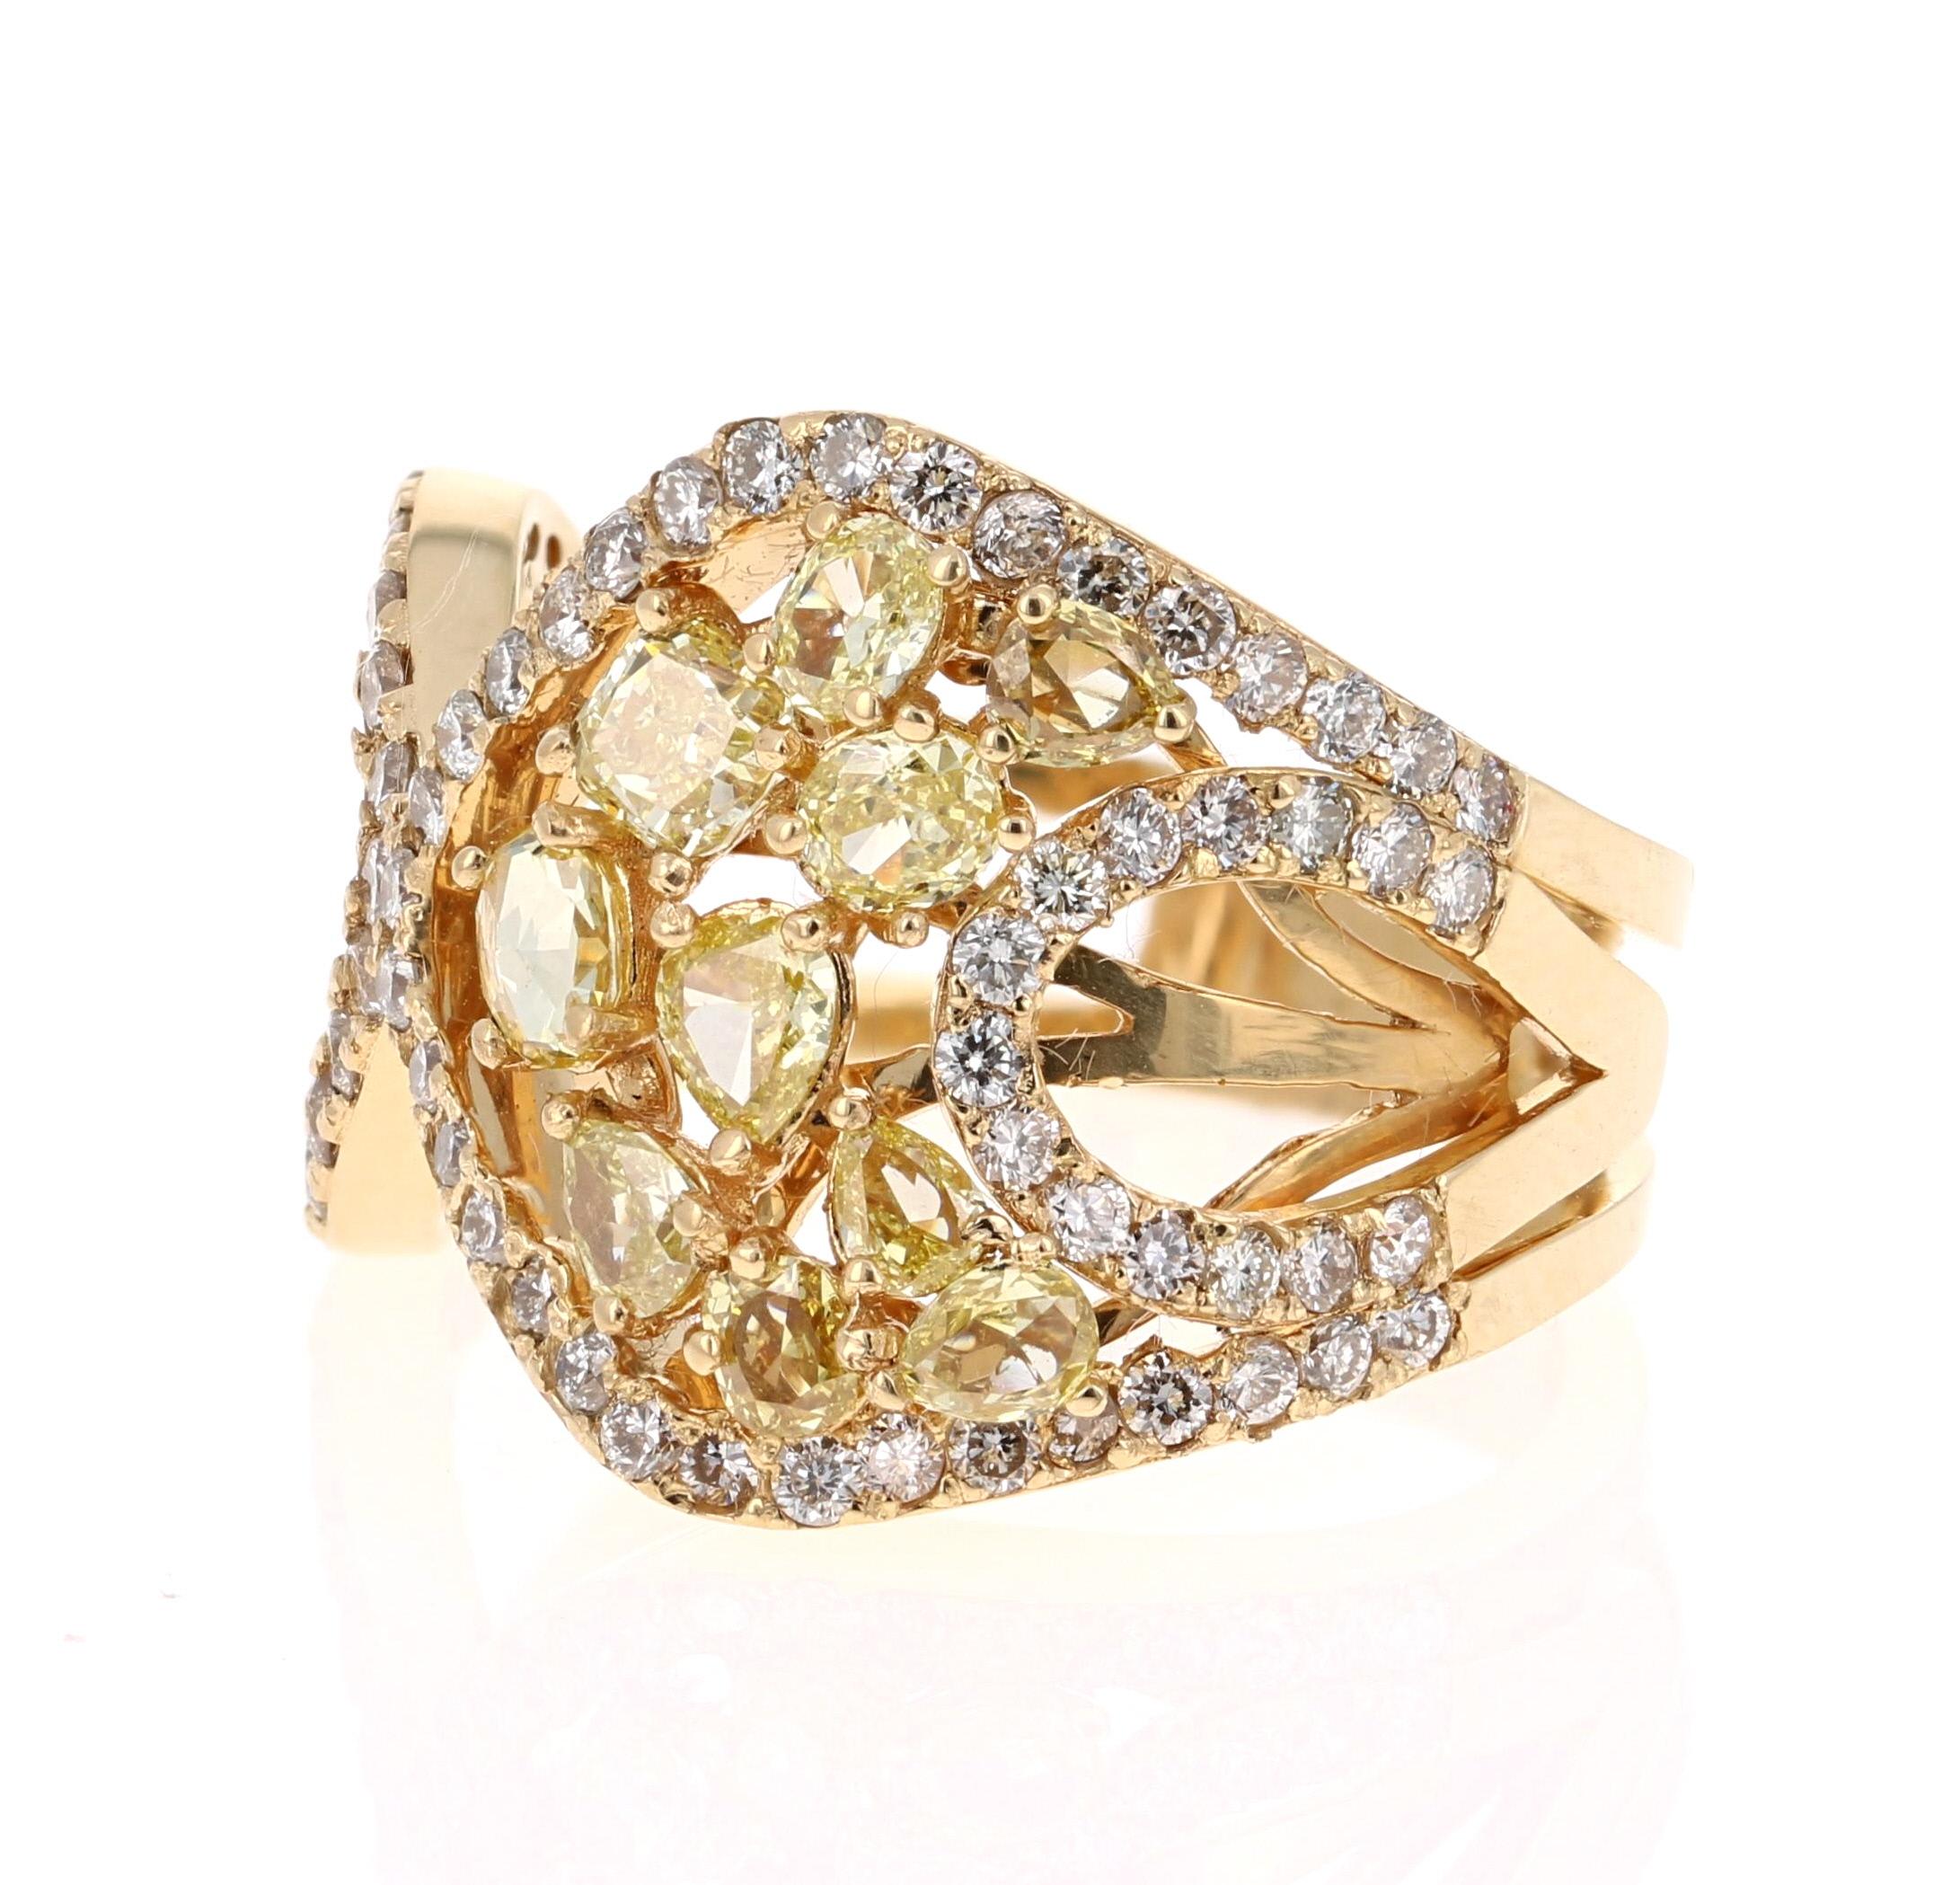 Contemporary 1.91 Carat Fancy Yellow Diamond Cocktail Ring 18 Karat Yellow Gold For Sale